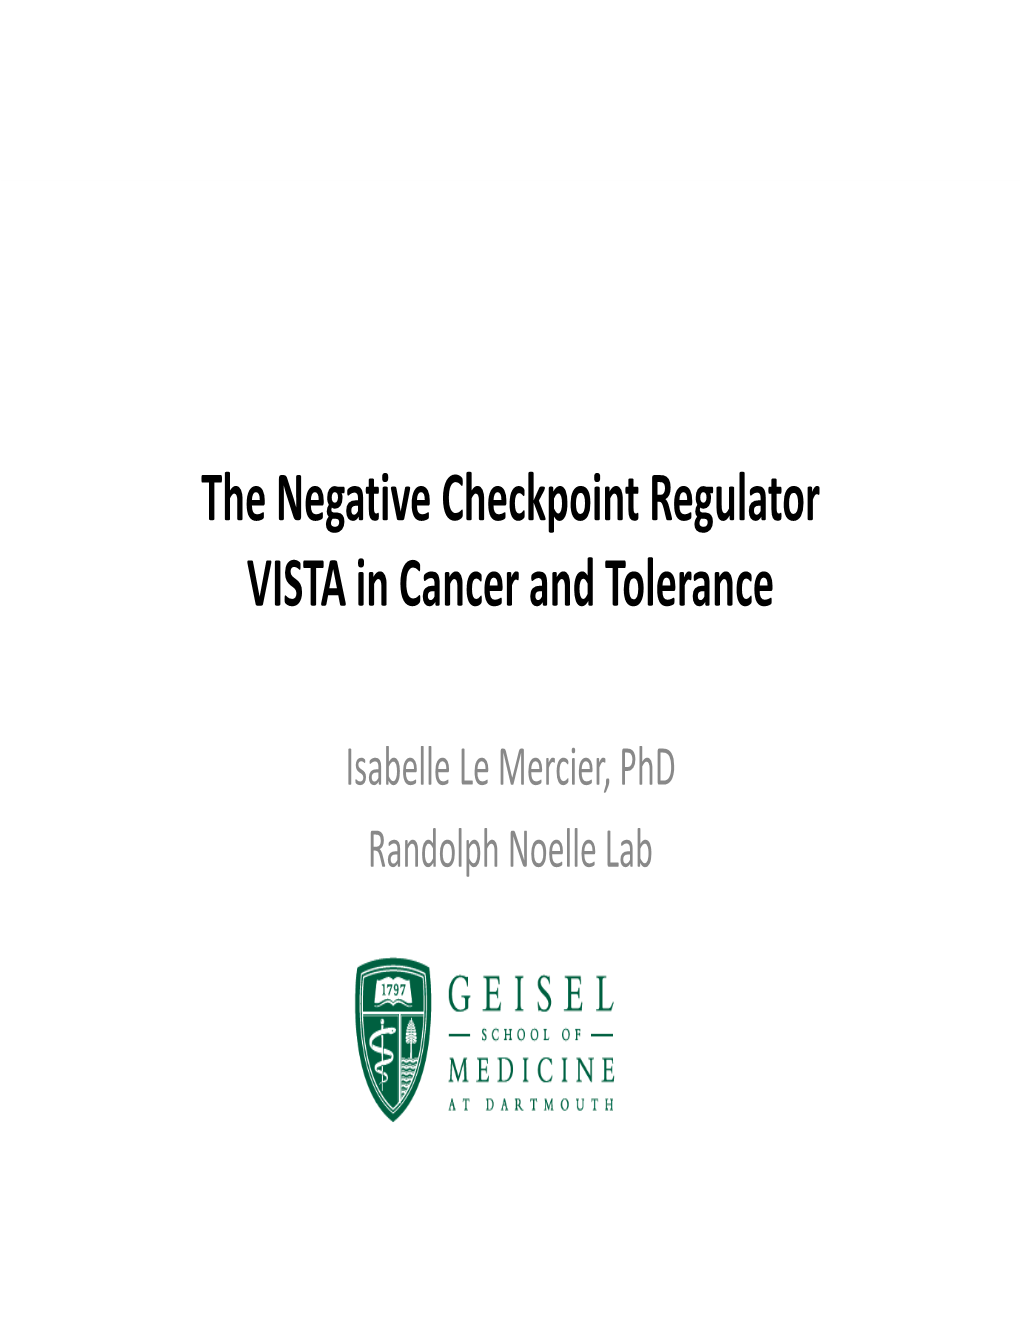 The Negative Checkpoint Regulator VISTA in Cancer and Tolerance